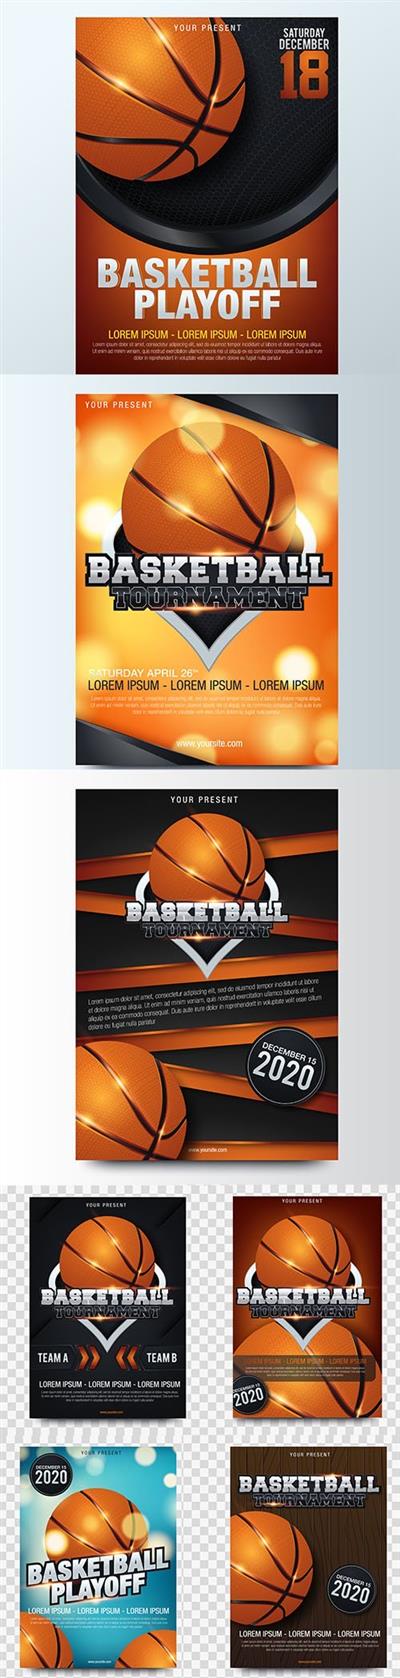 Basketball Poster with Ball Premium Illustrations